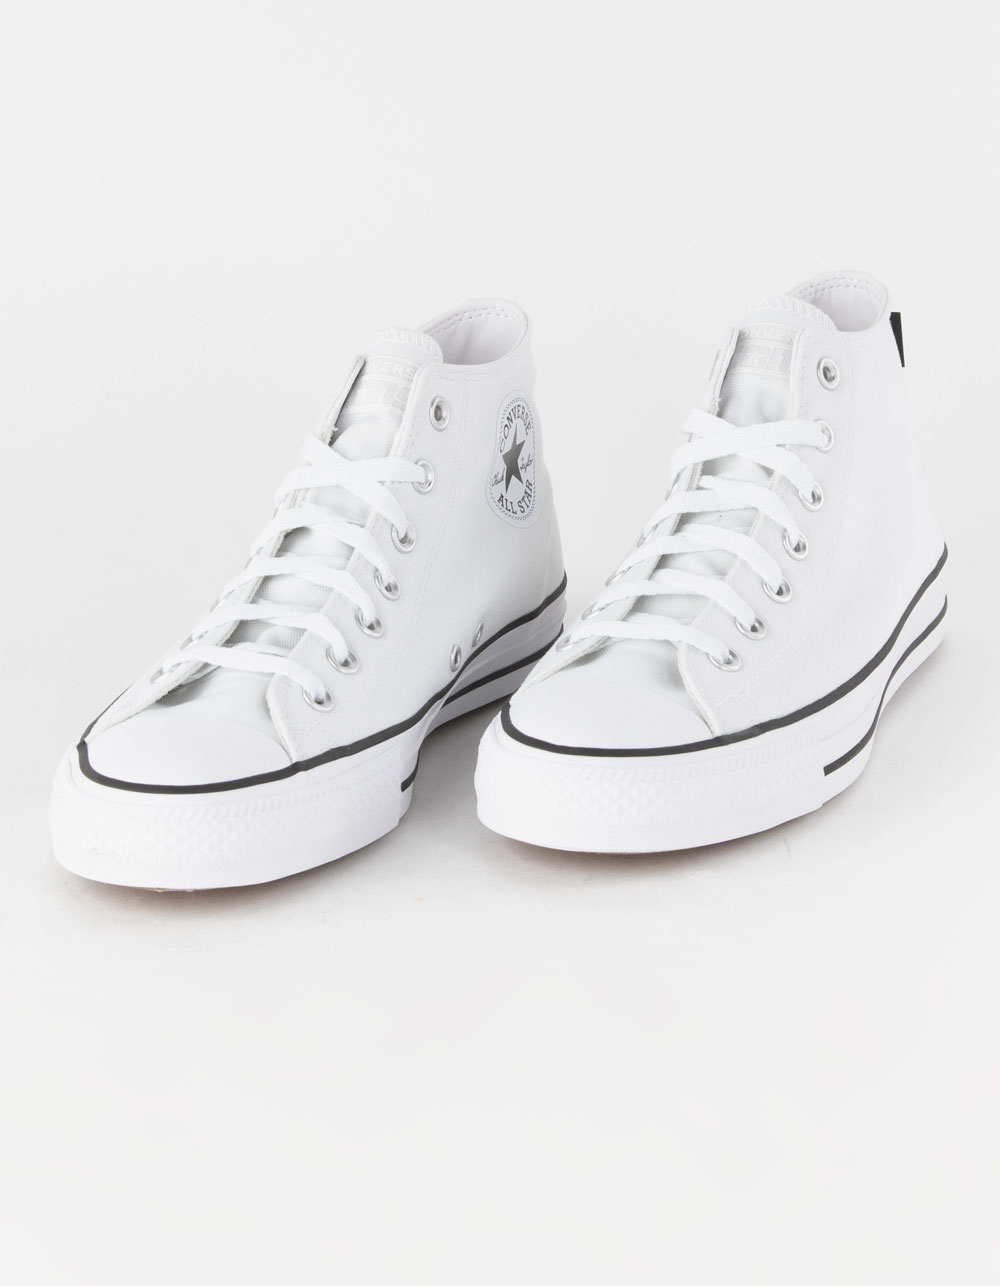 CONVERSE Taylor All Star Pro Mid Mens Shoes - WHT/BLK |